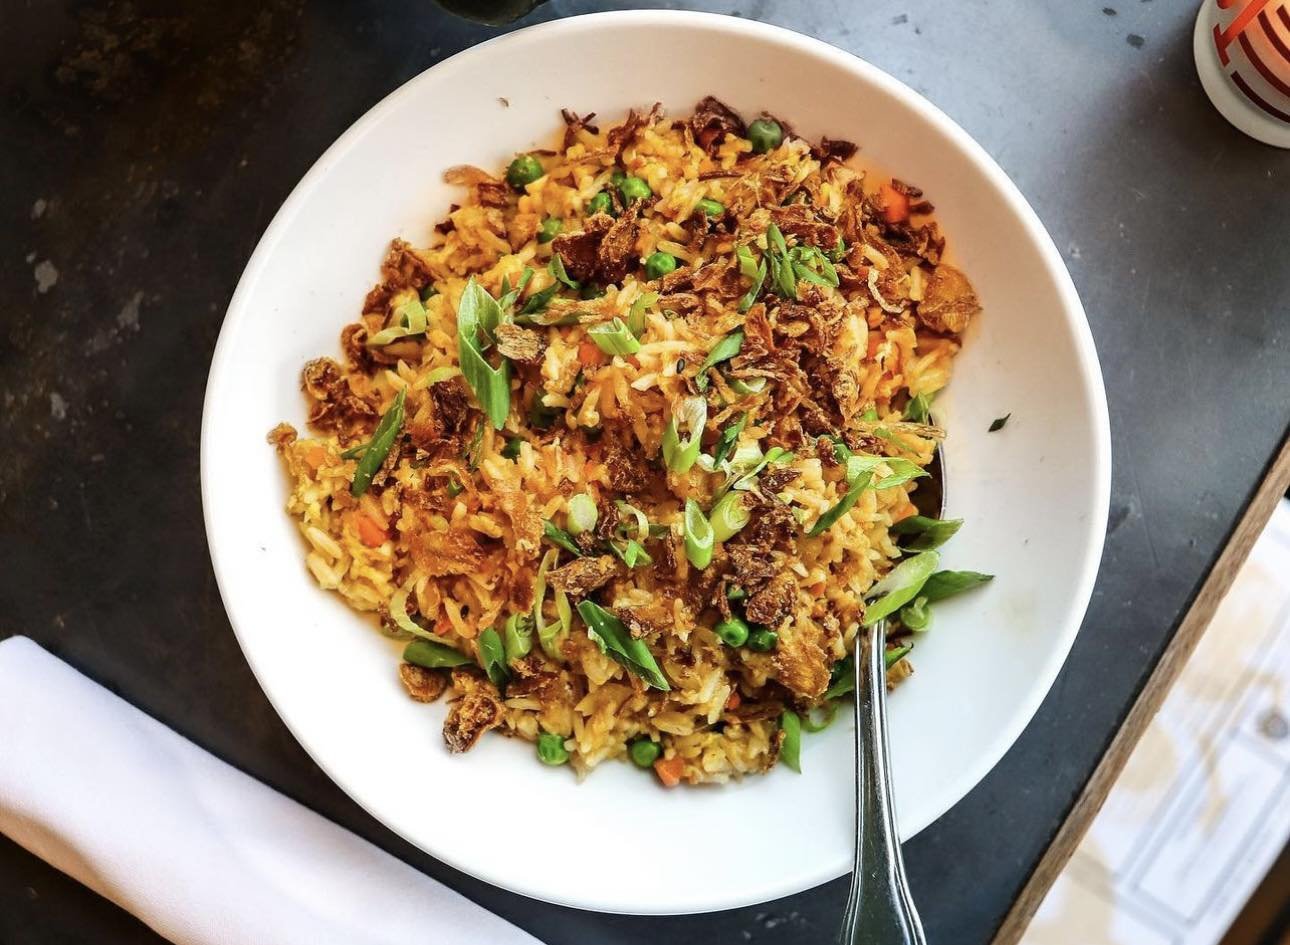 🥠 Fortune of the day: You will find unexpected happiness at the end of this bowl. Added happiness✨it&rsquo;s looking like a nice day and the patio will be open!✨

#ThePeterboro #midtowndetroit #detroitchinatown #Detroit #casscorridor #FriedRiceLove